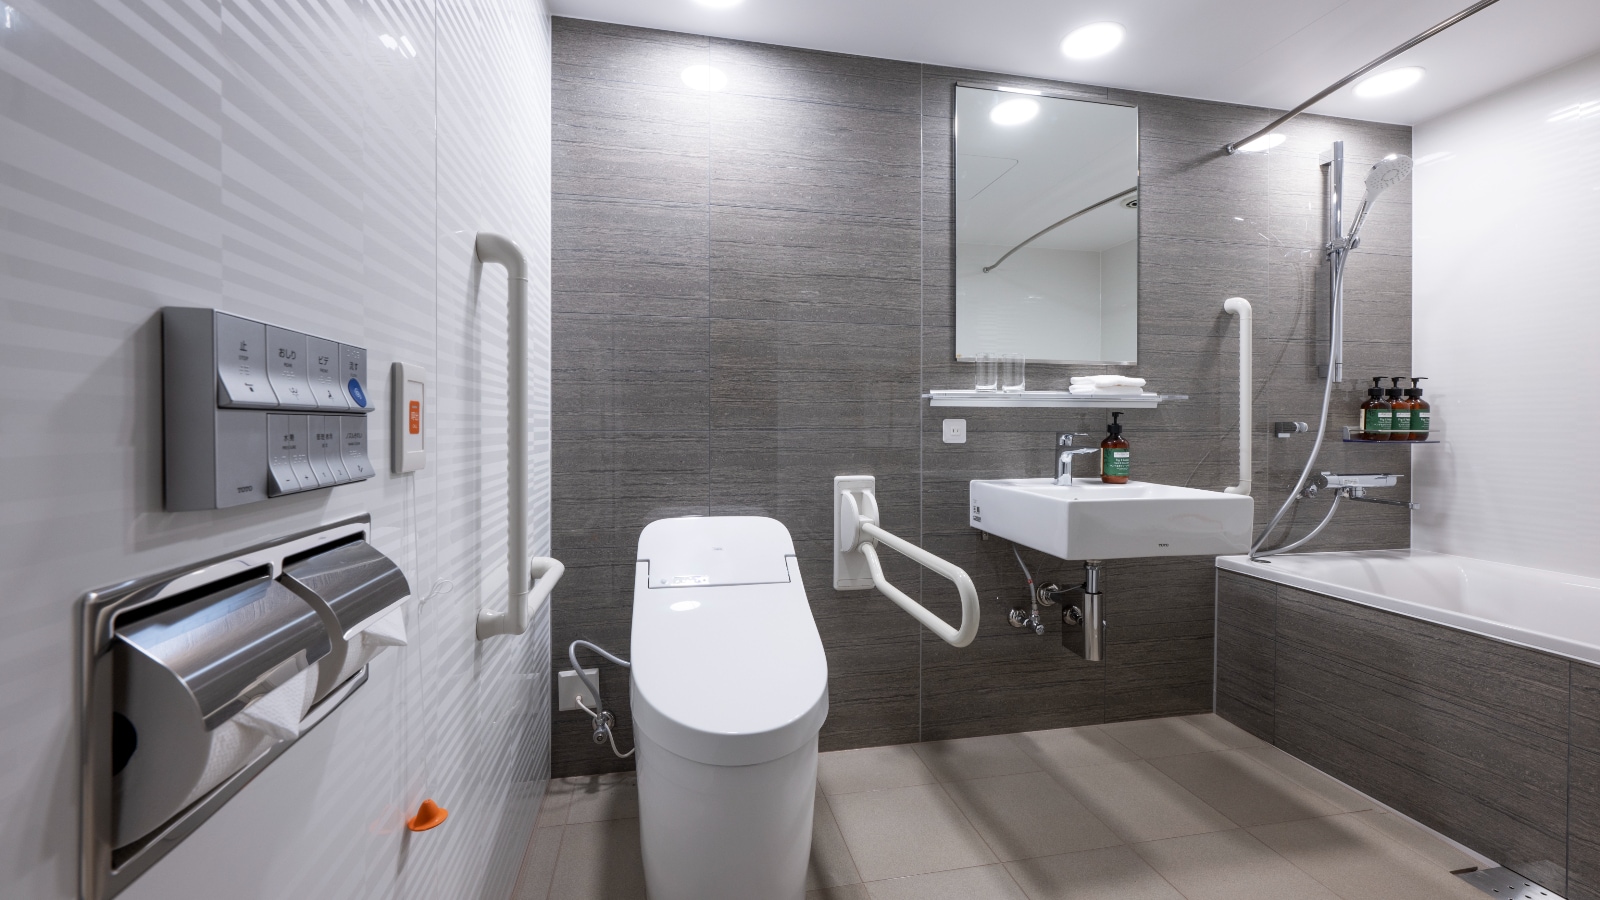 The bathroom in the accessible room is a spacious space that is easy to use even with a wheelchair.